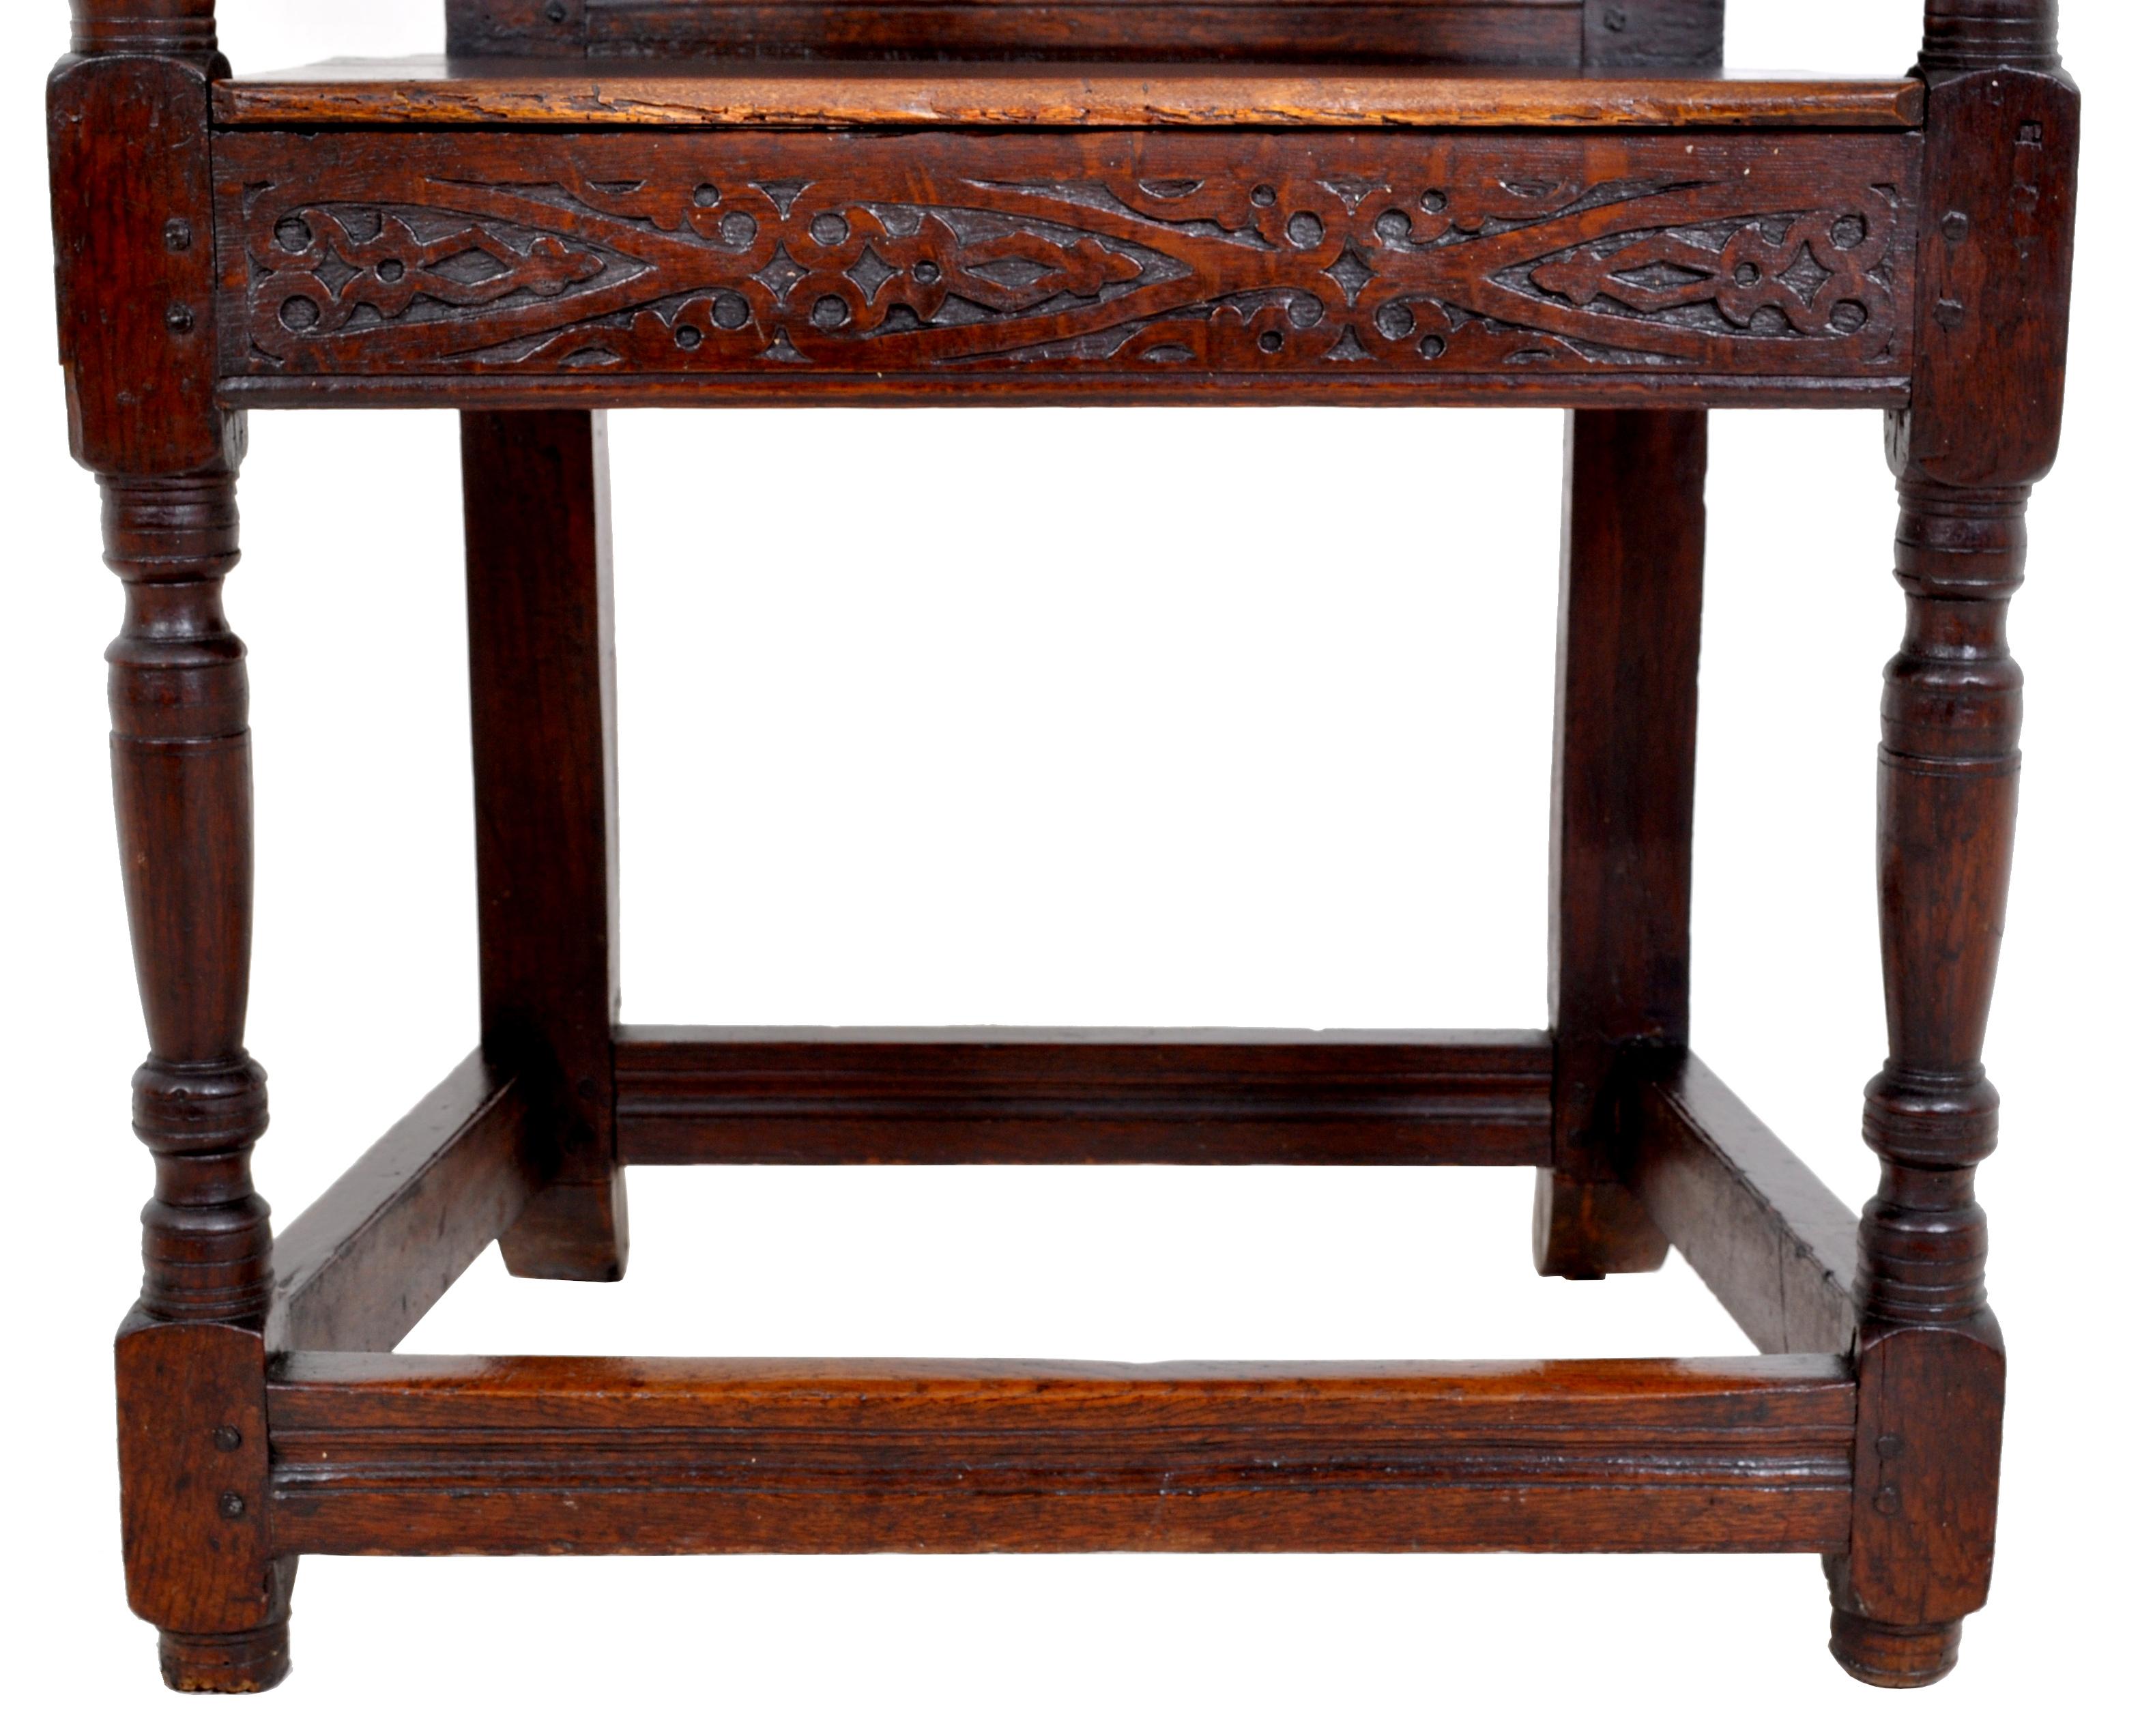 Hand-Carved Antique 17th Century Charles II Yorkshire Carved Inlaid Oak Wainscot Chair, 1670